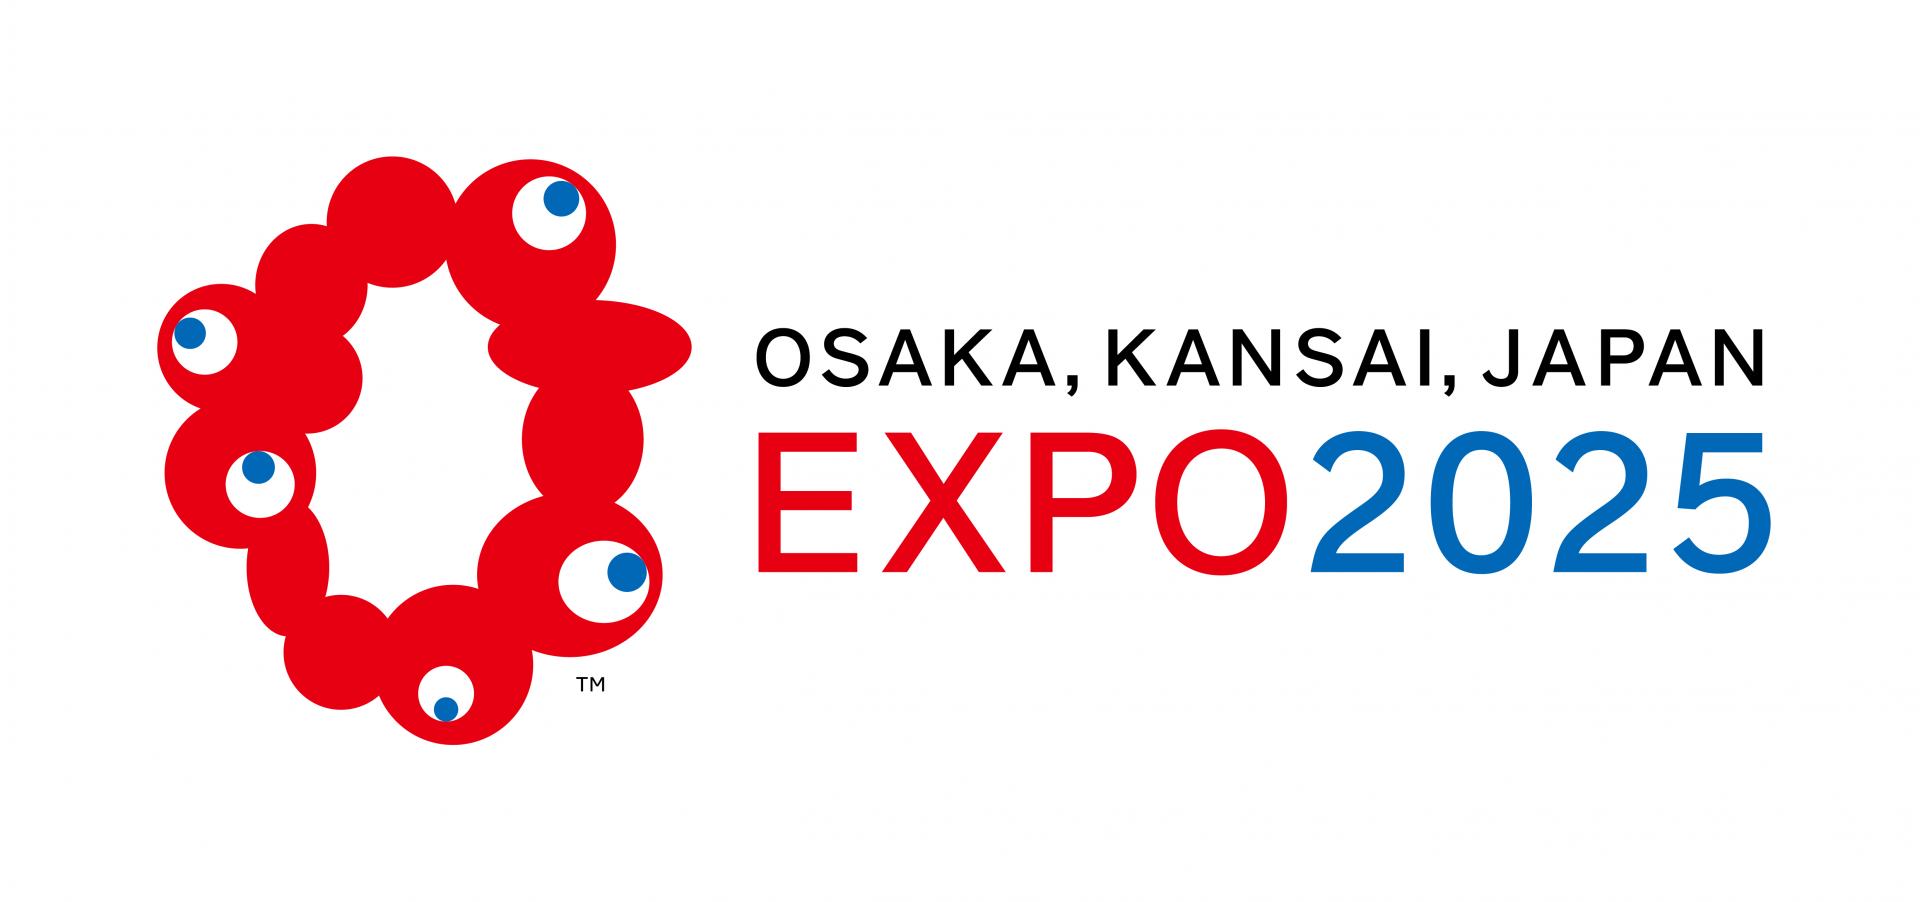 Understanding the themes and concepts is the key to enjoying all the thrills that await at Expo Osaka, Kansai. 